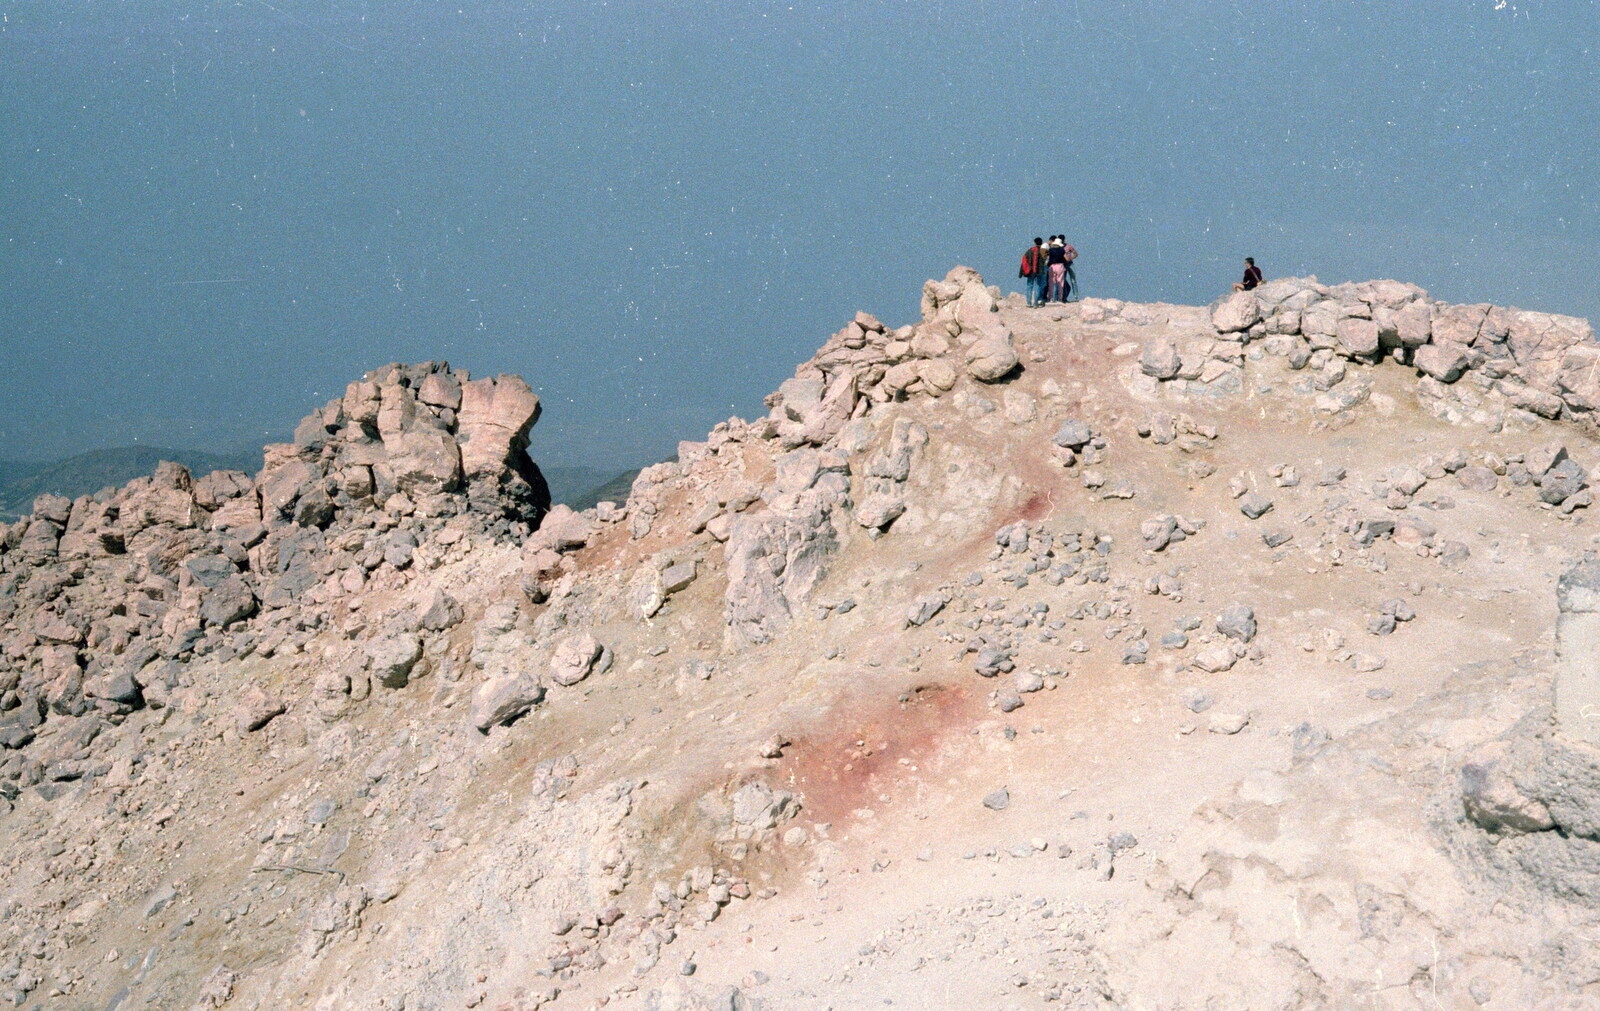 Other climbers on the top of the mountain from A Holiday in Los Christianos, Tenerife - 19th June 1985